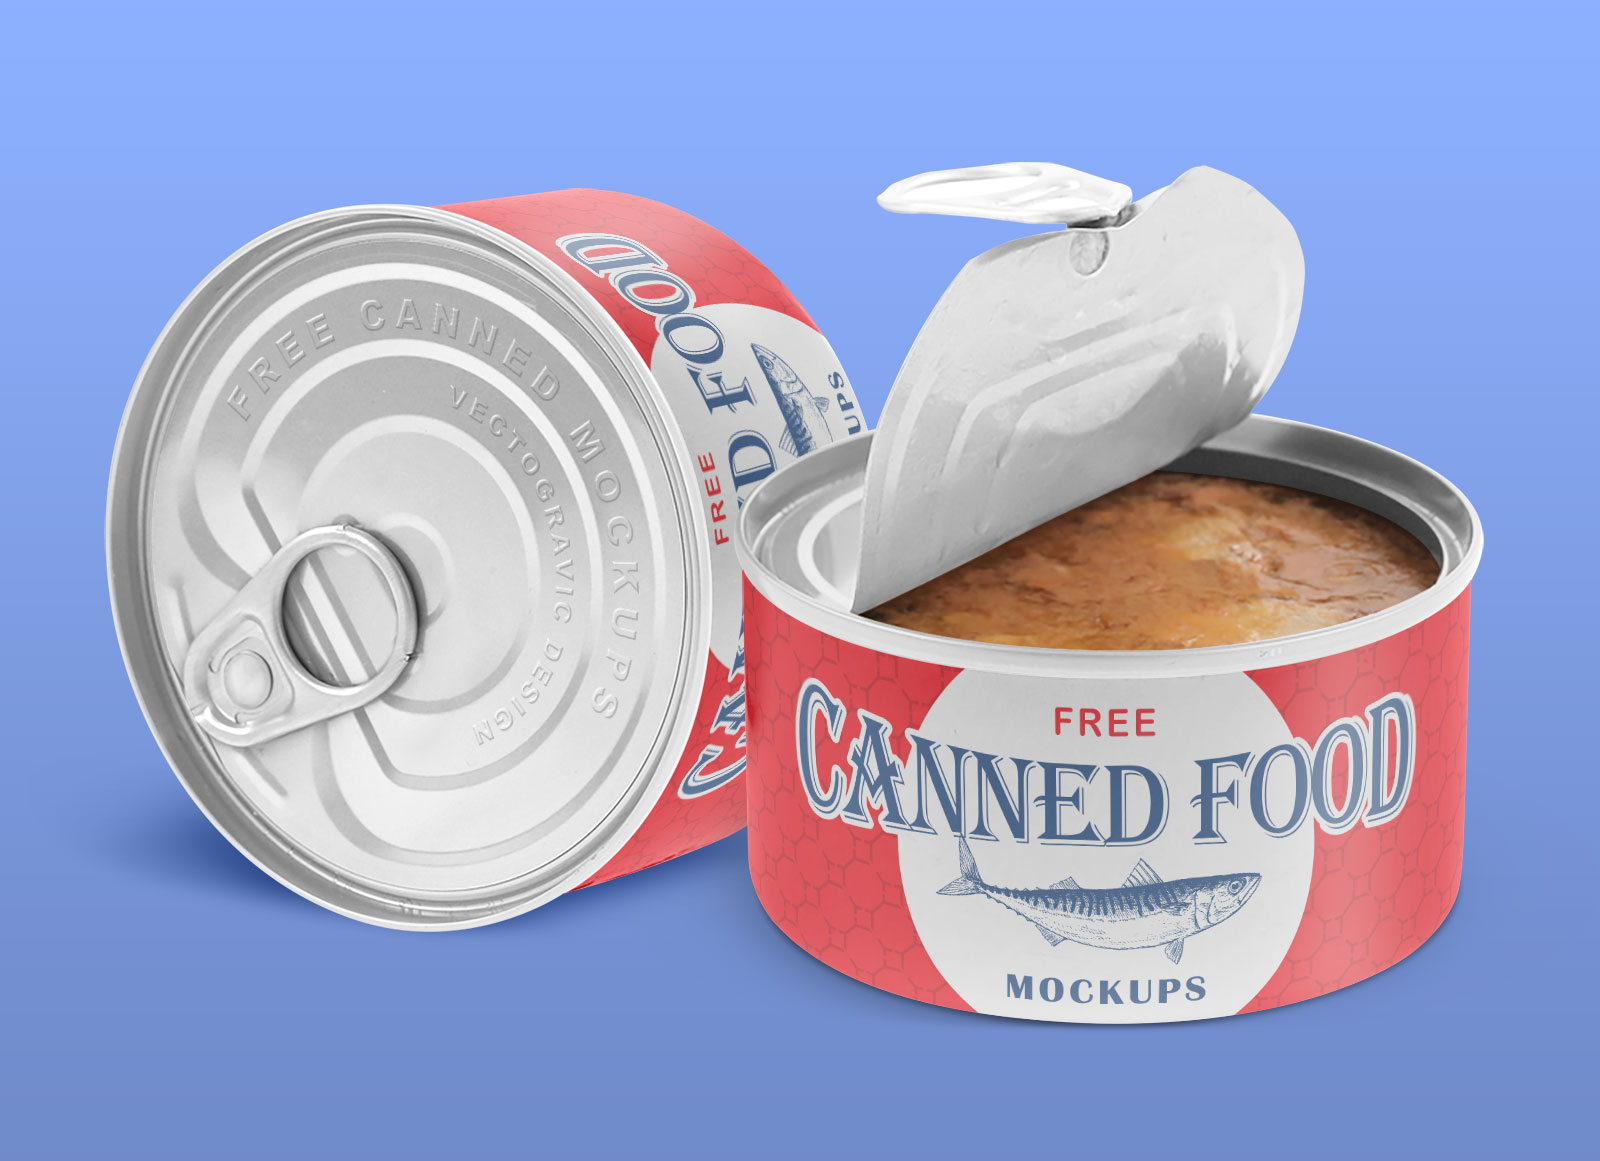 Free Canned Food Tin Container Packaging Mockup PSD - Good Mockups